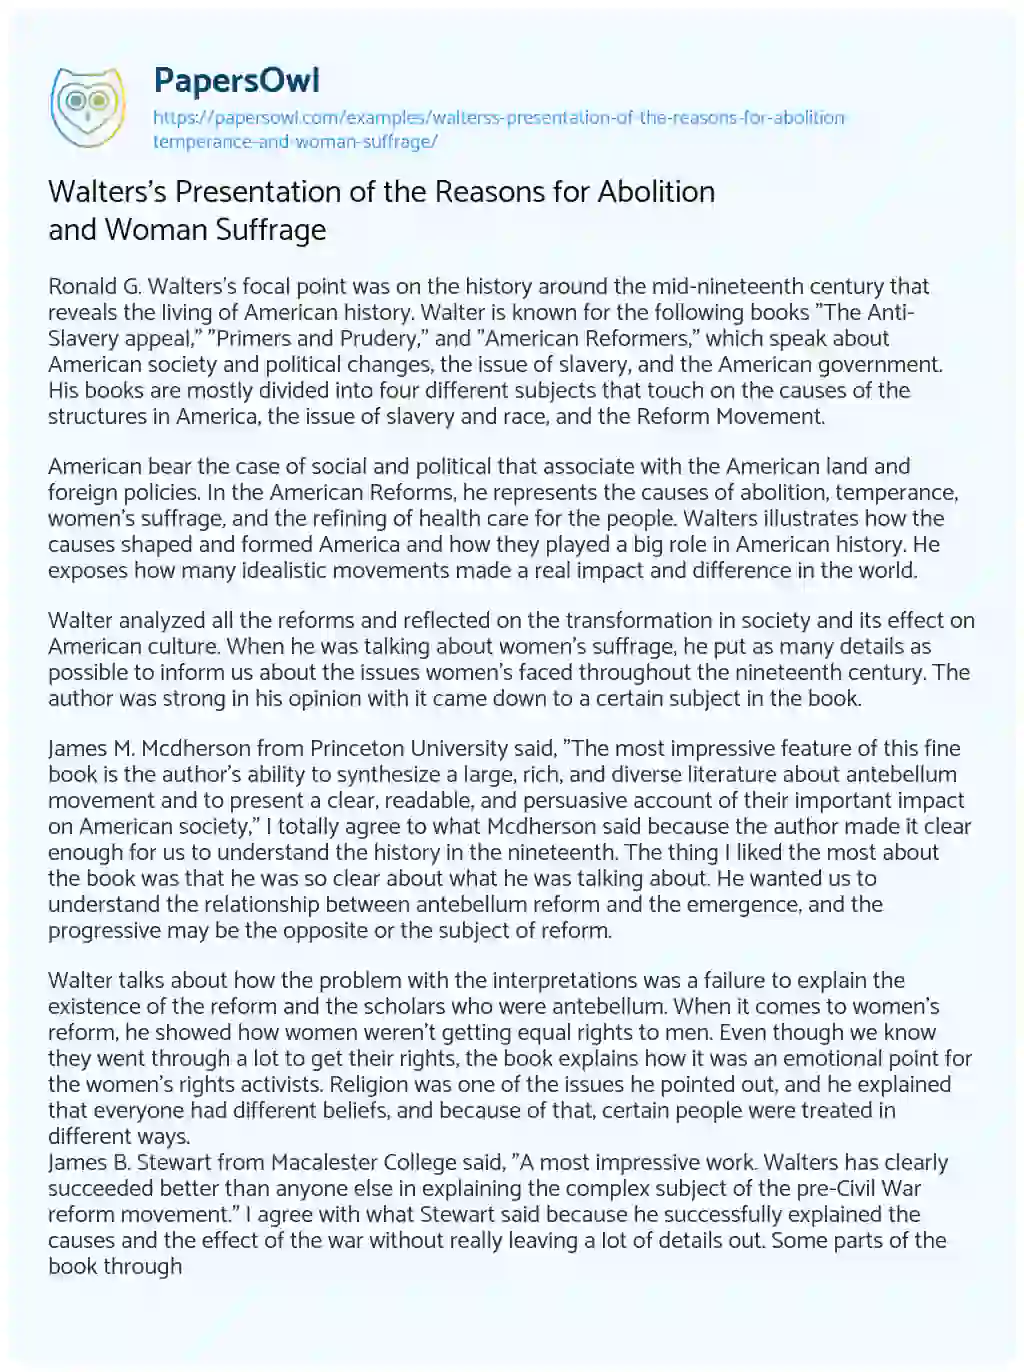 Essay on Walters’s Presentation of the Reasons for Abolition and Woman Suffrage